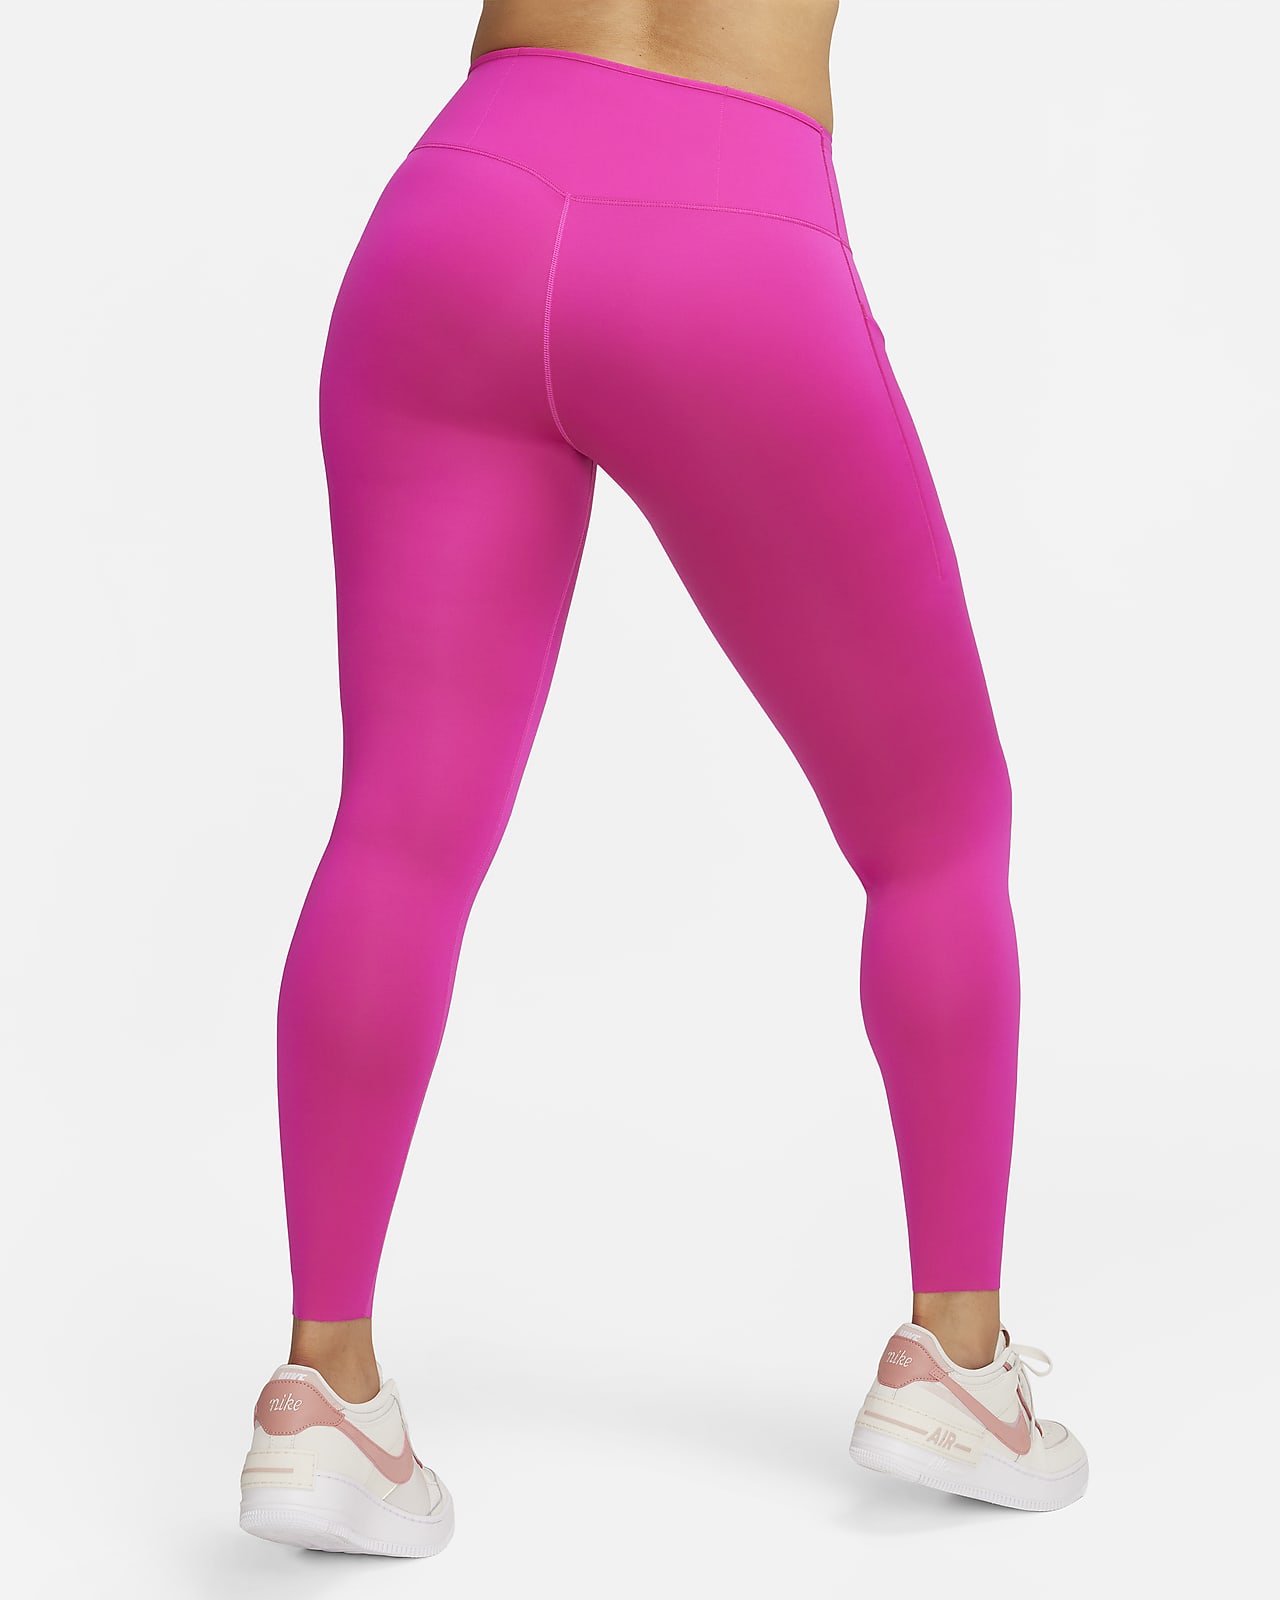 go firm support mid rise full length leggings with pockets 37rfP7